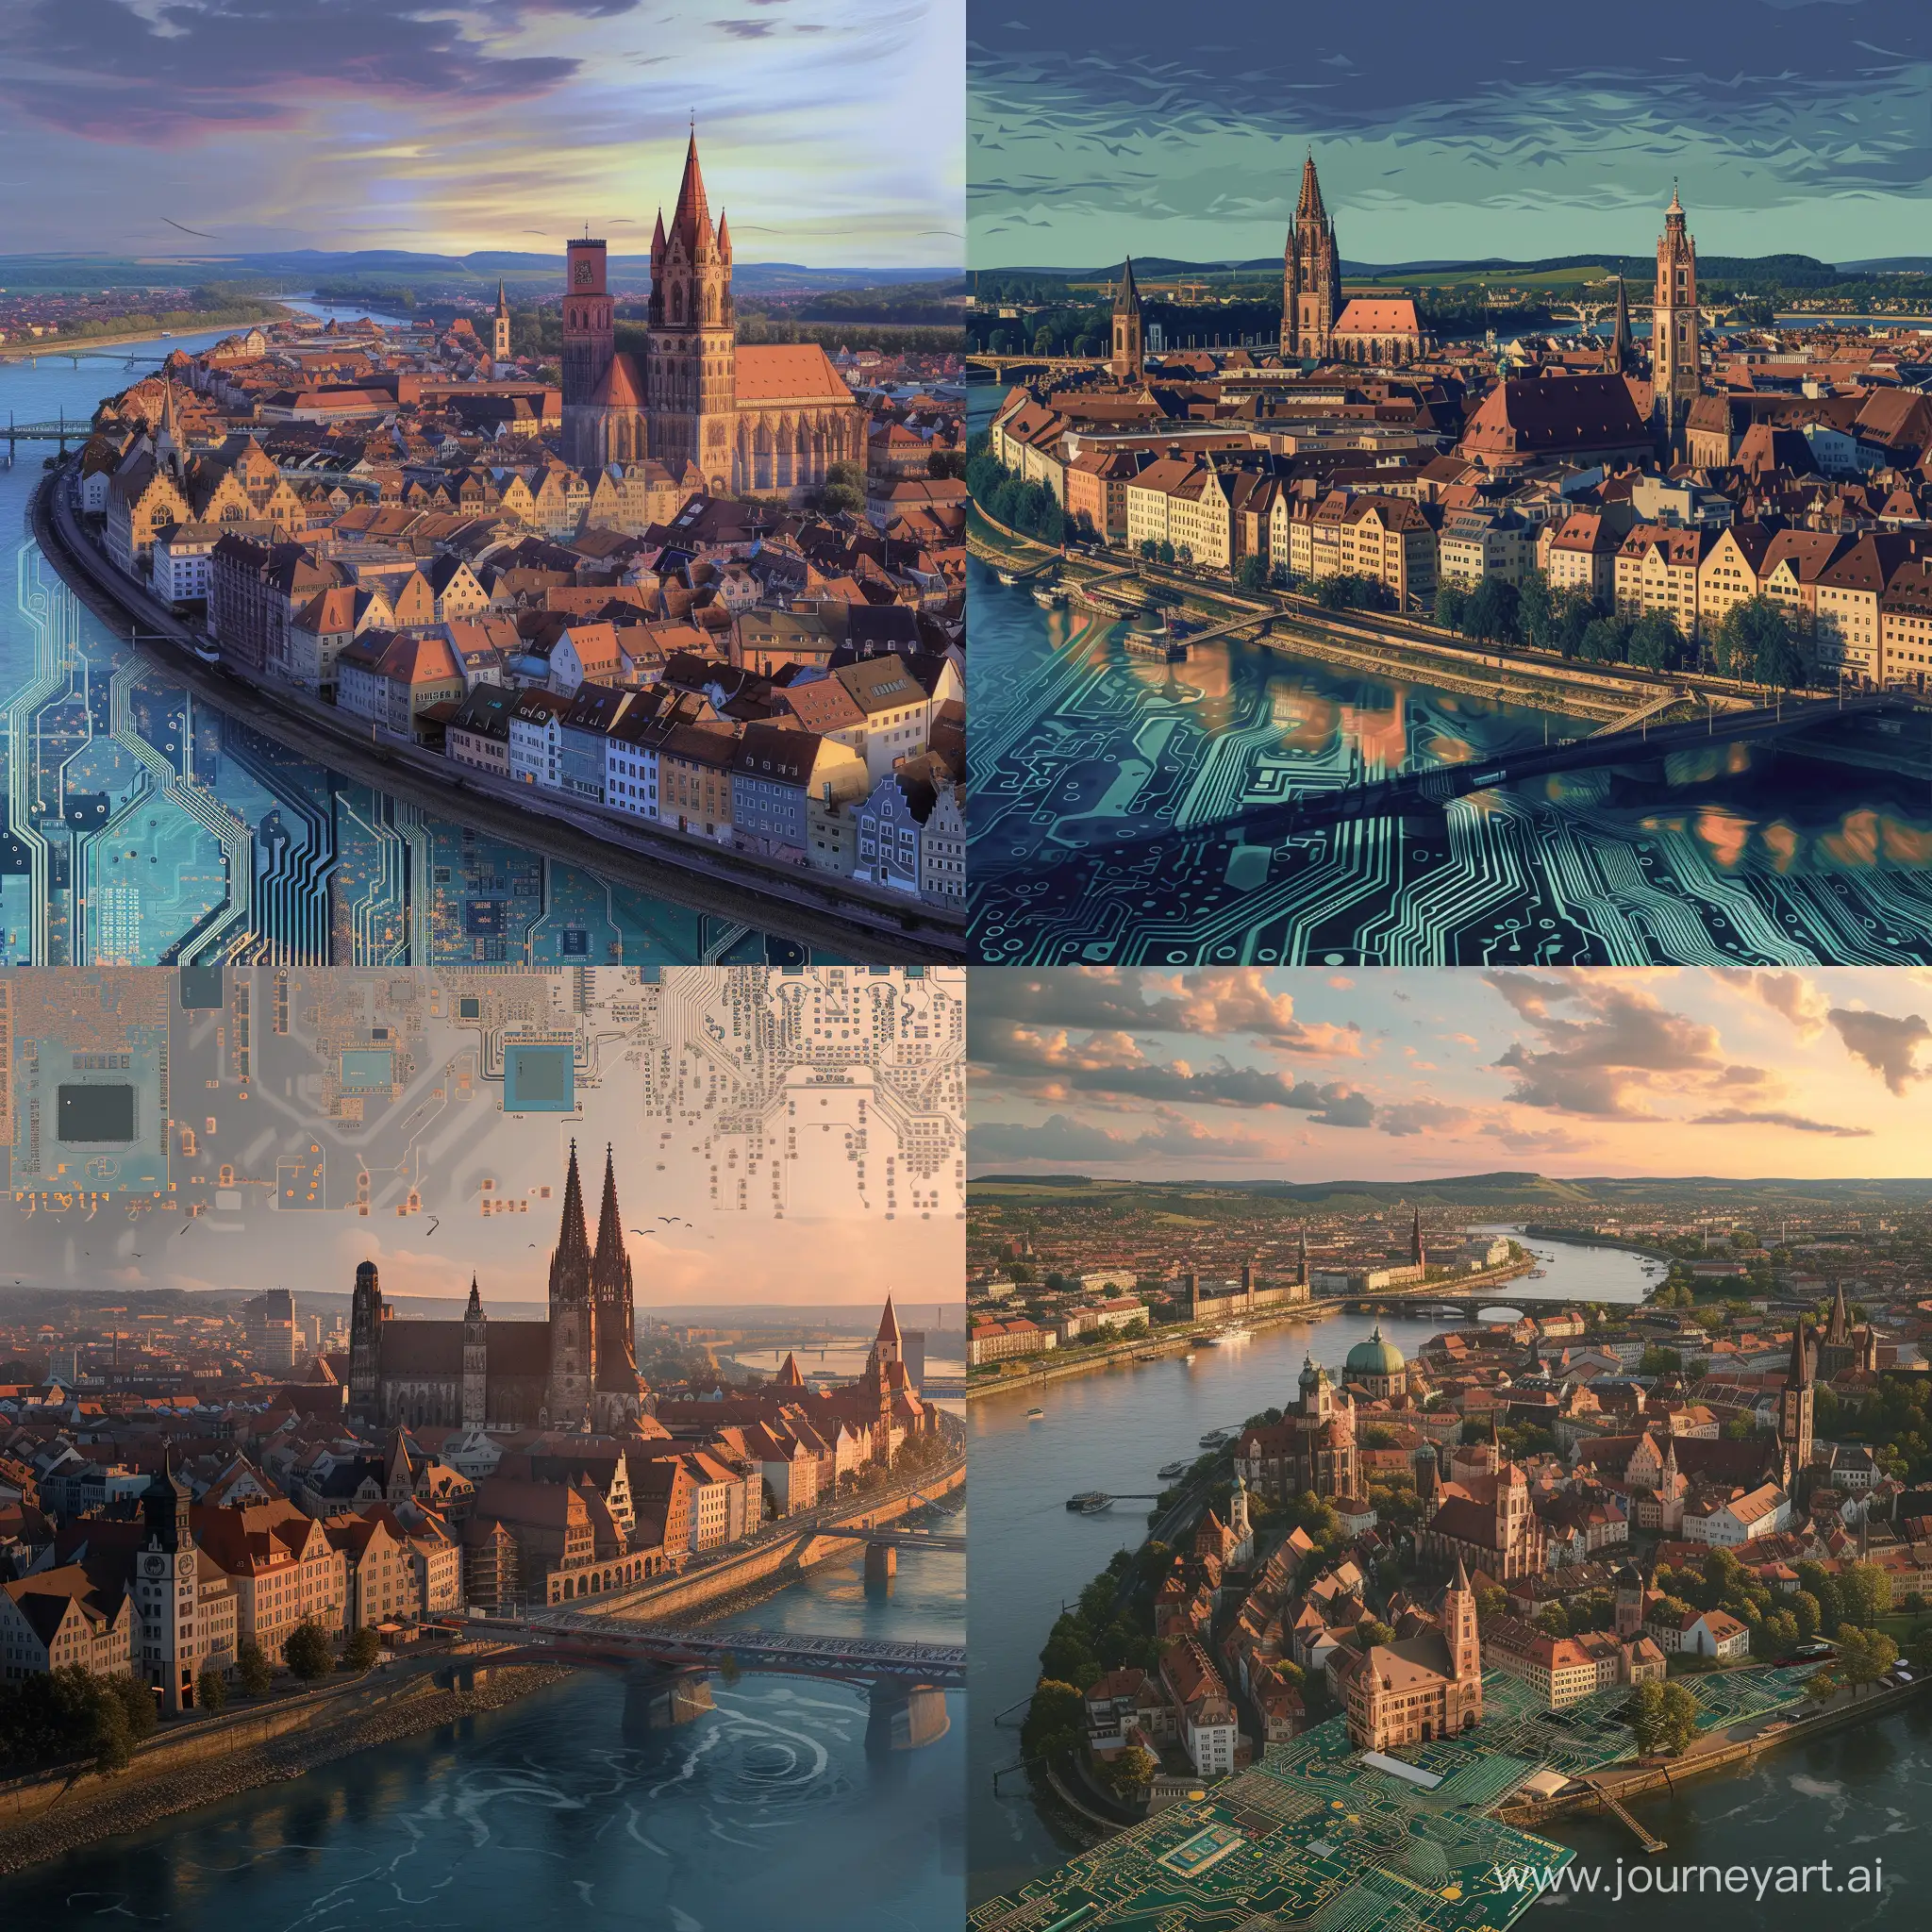 create an image of Regensburg including the skyline and Danube. It should be interwoven with a computerchip. Make it look photorealistic